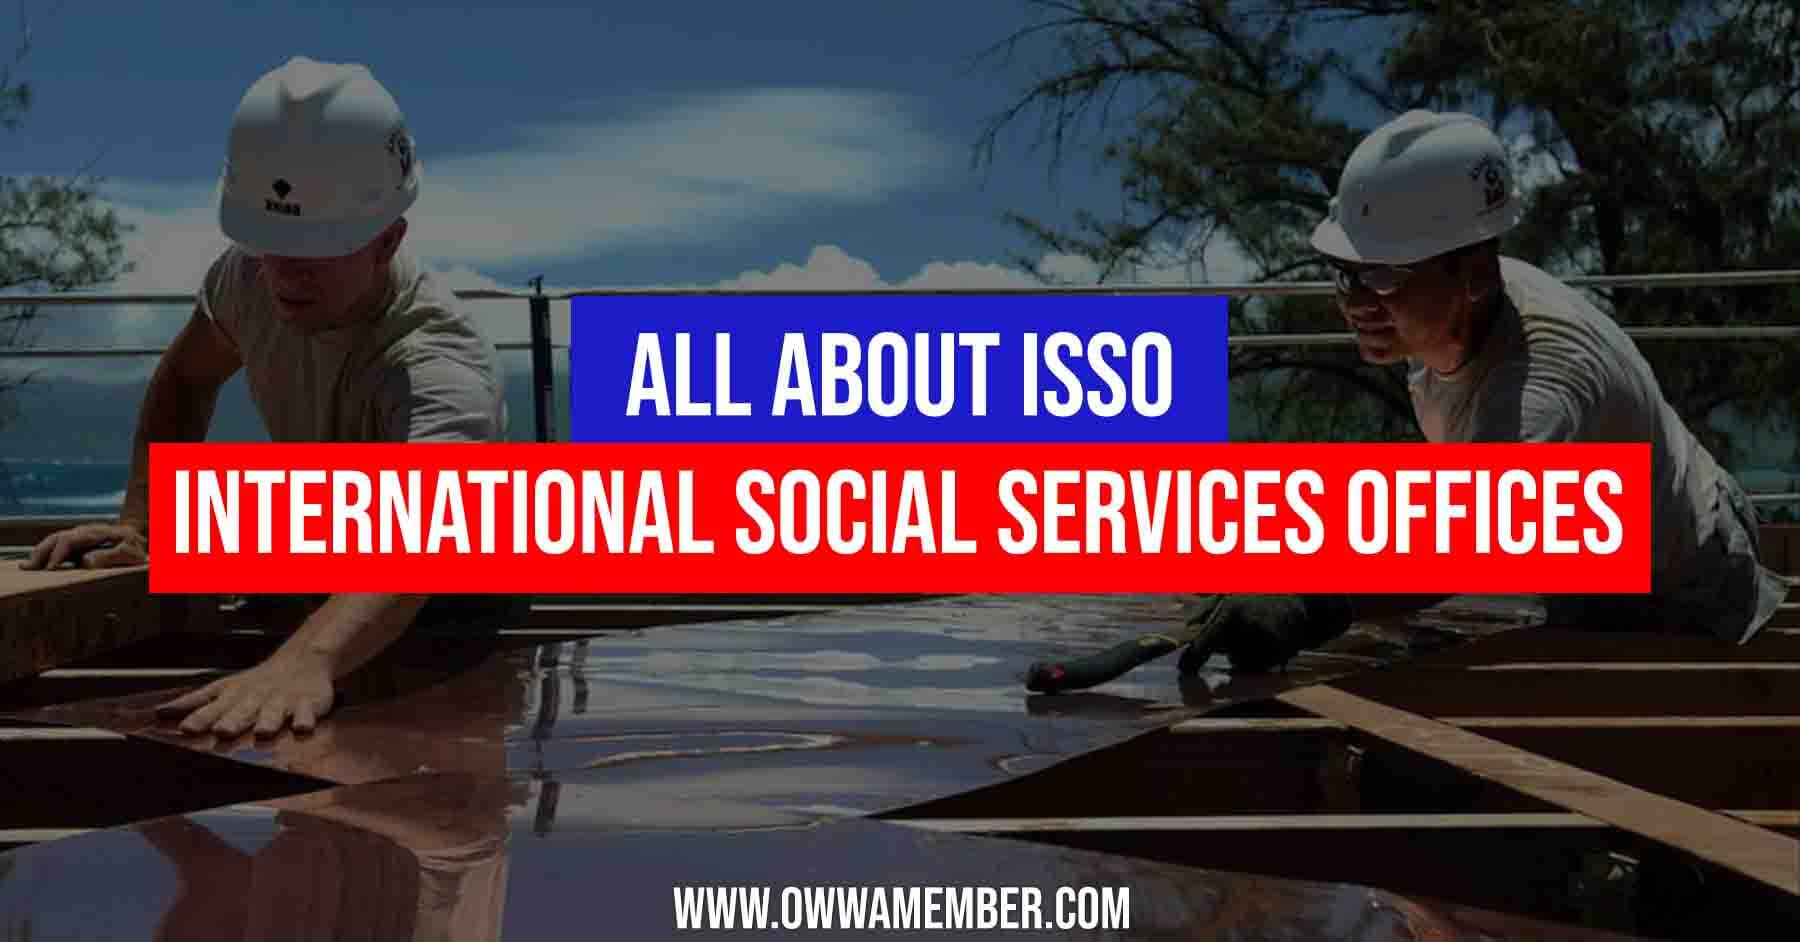 International Social Services Offices (ISSOs)